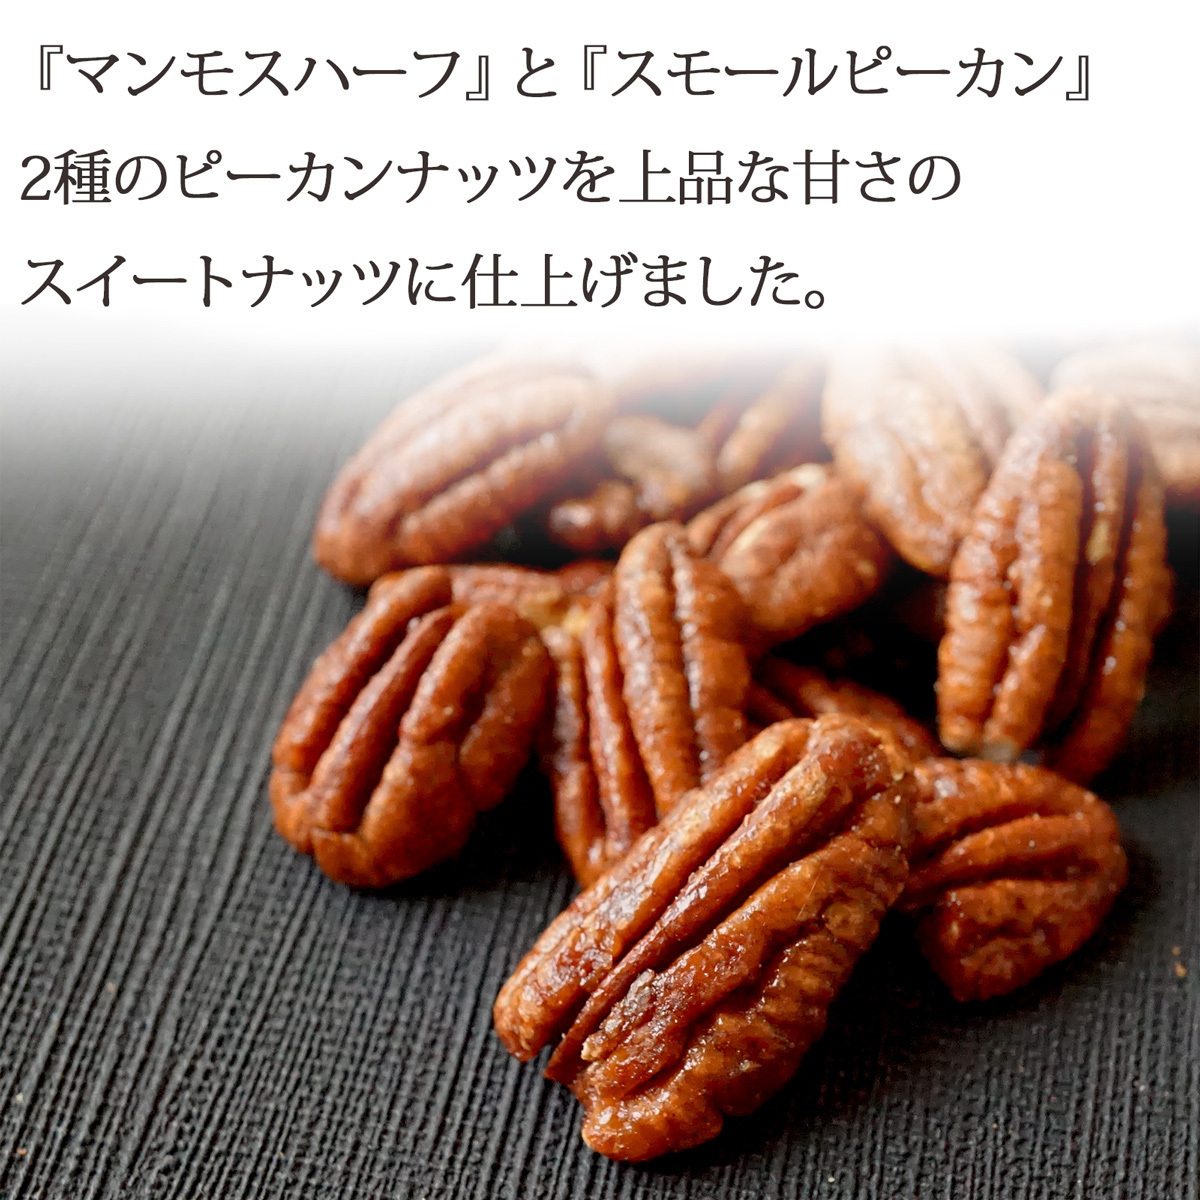  candy pi- can nuts 200g piece packing small amount . walnut pe can nuts sweets .. candy - snack candy pi- can 